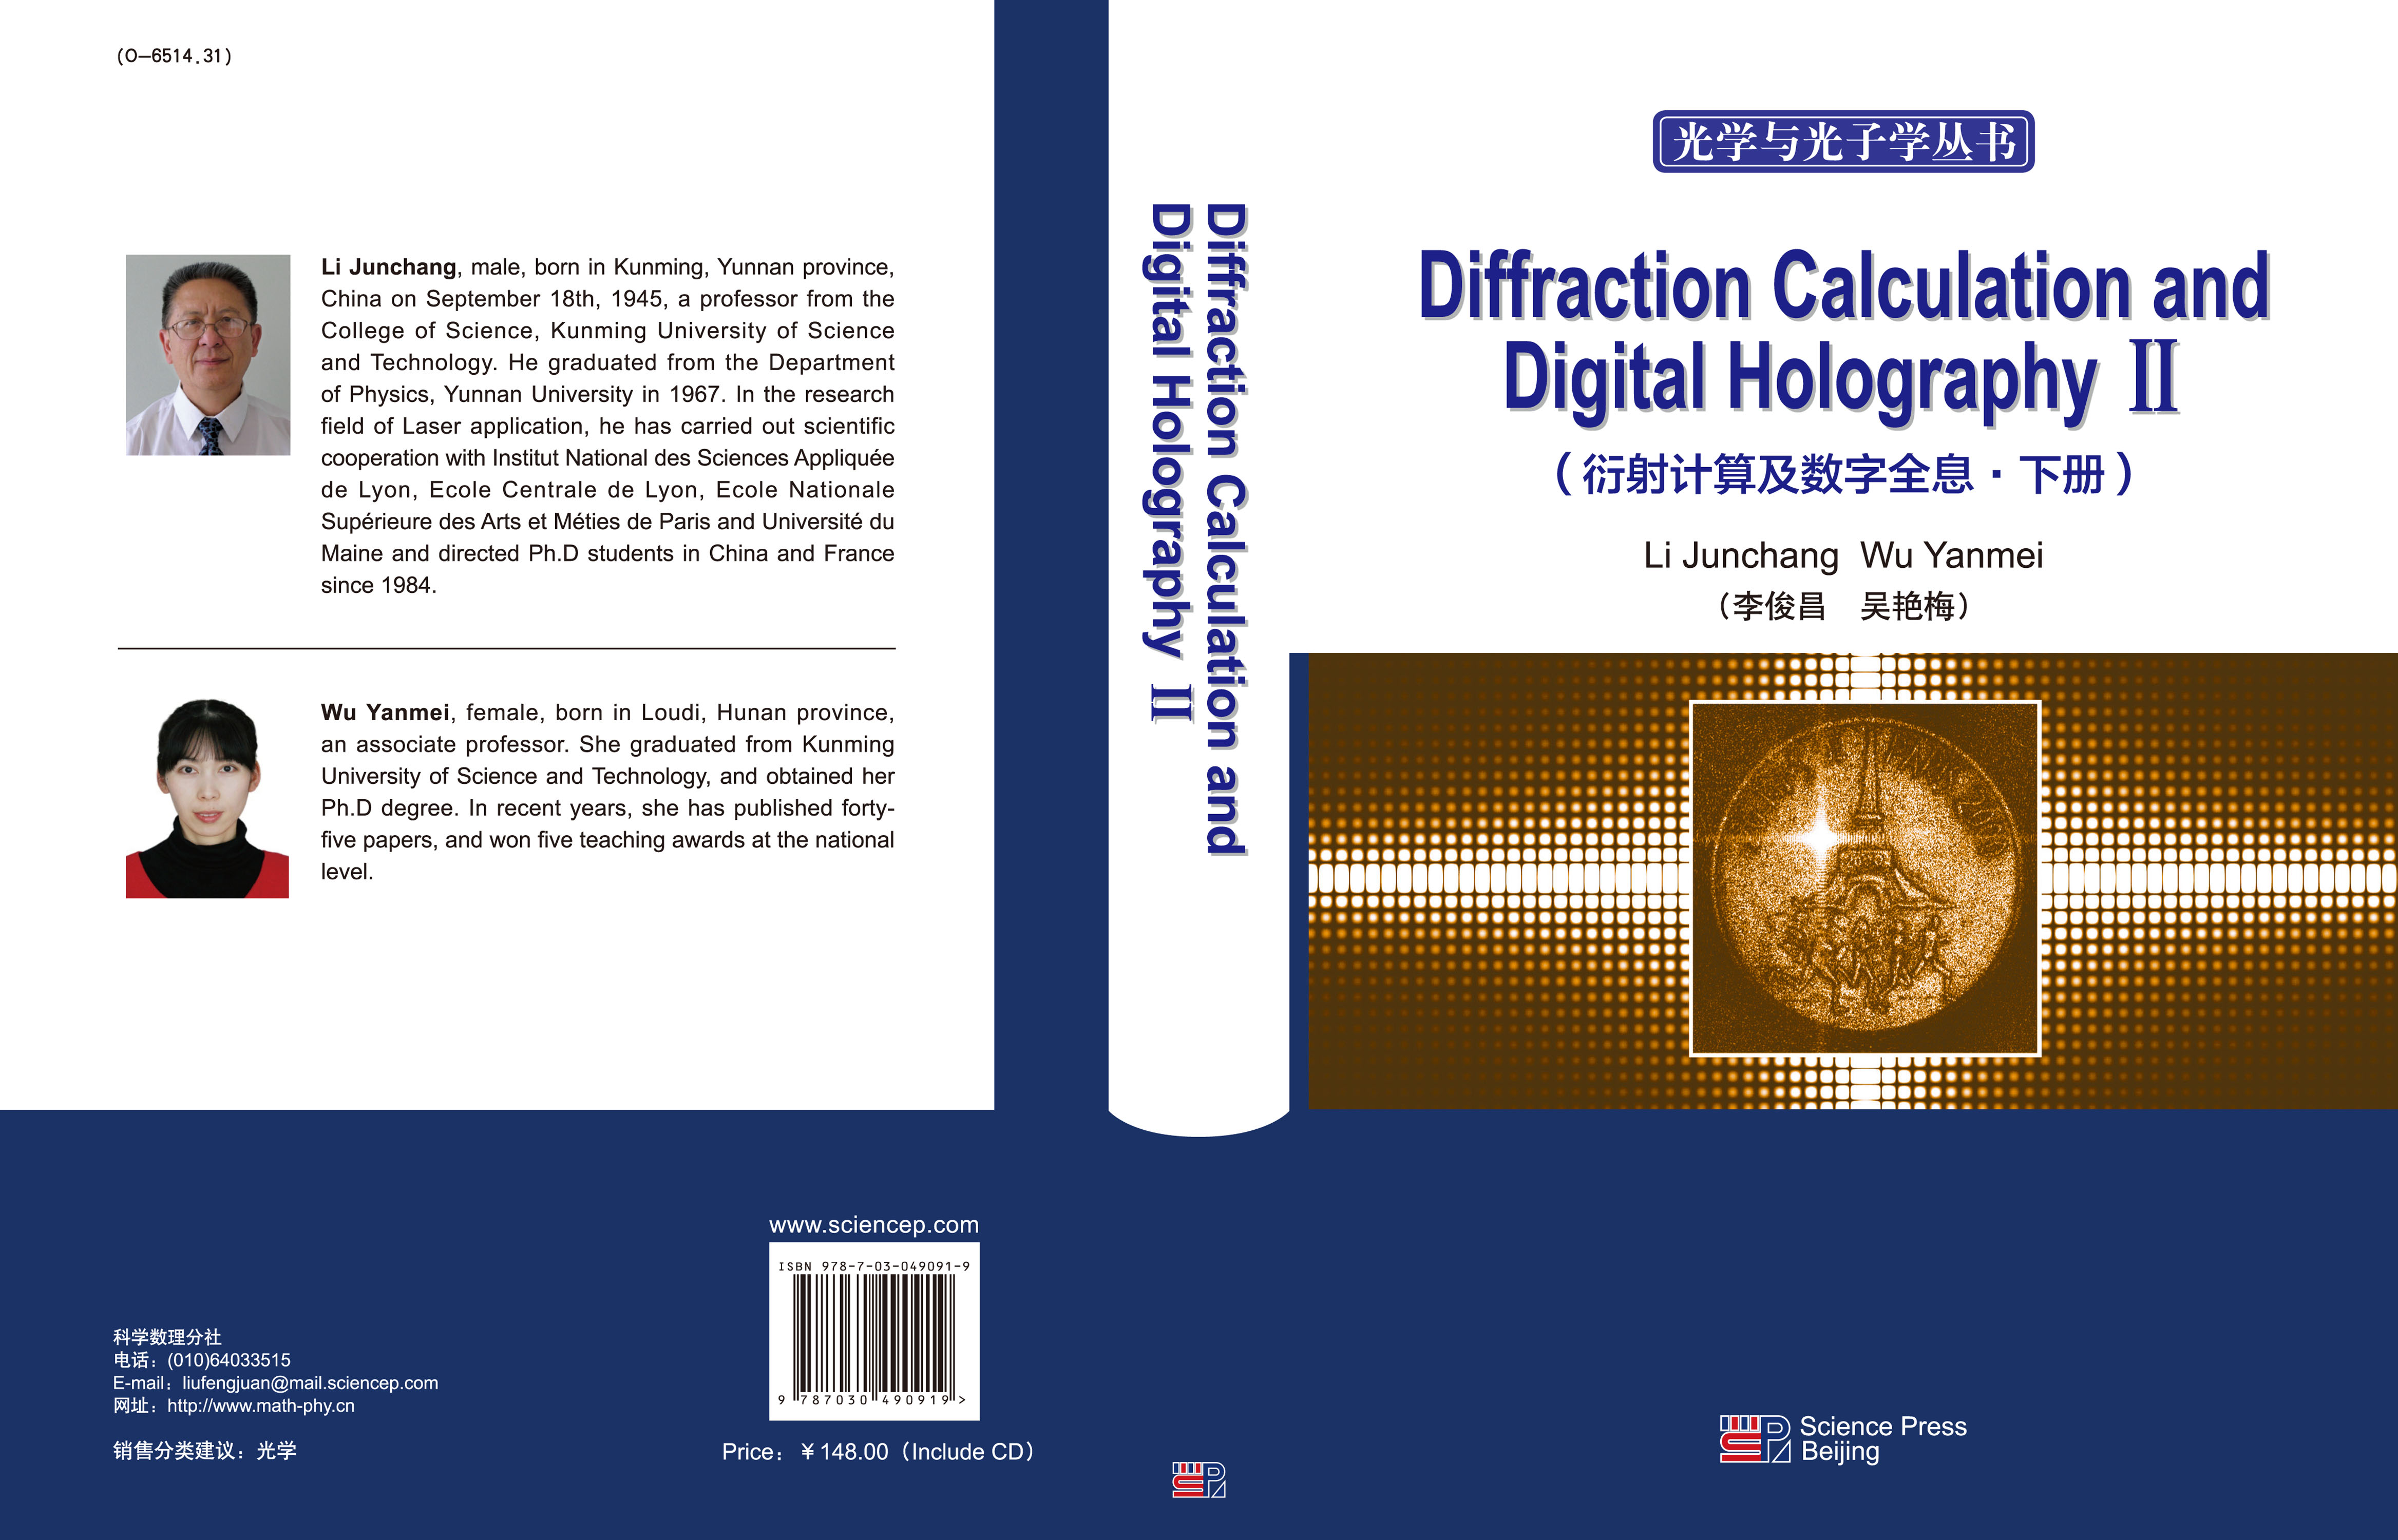 Diffraction Calculation and Digital Holography II